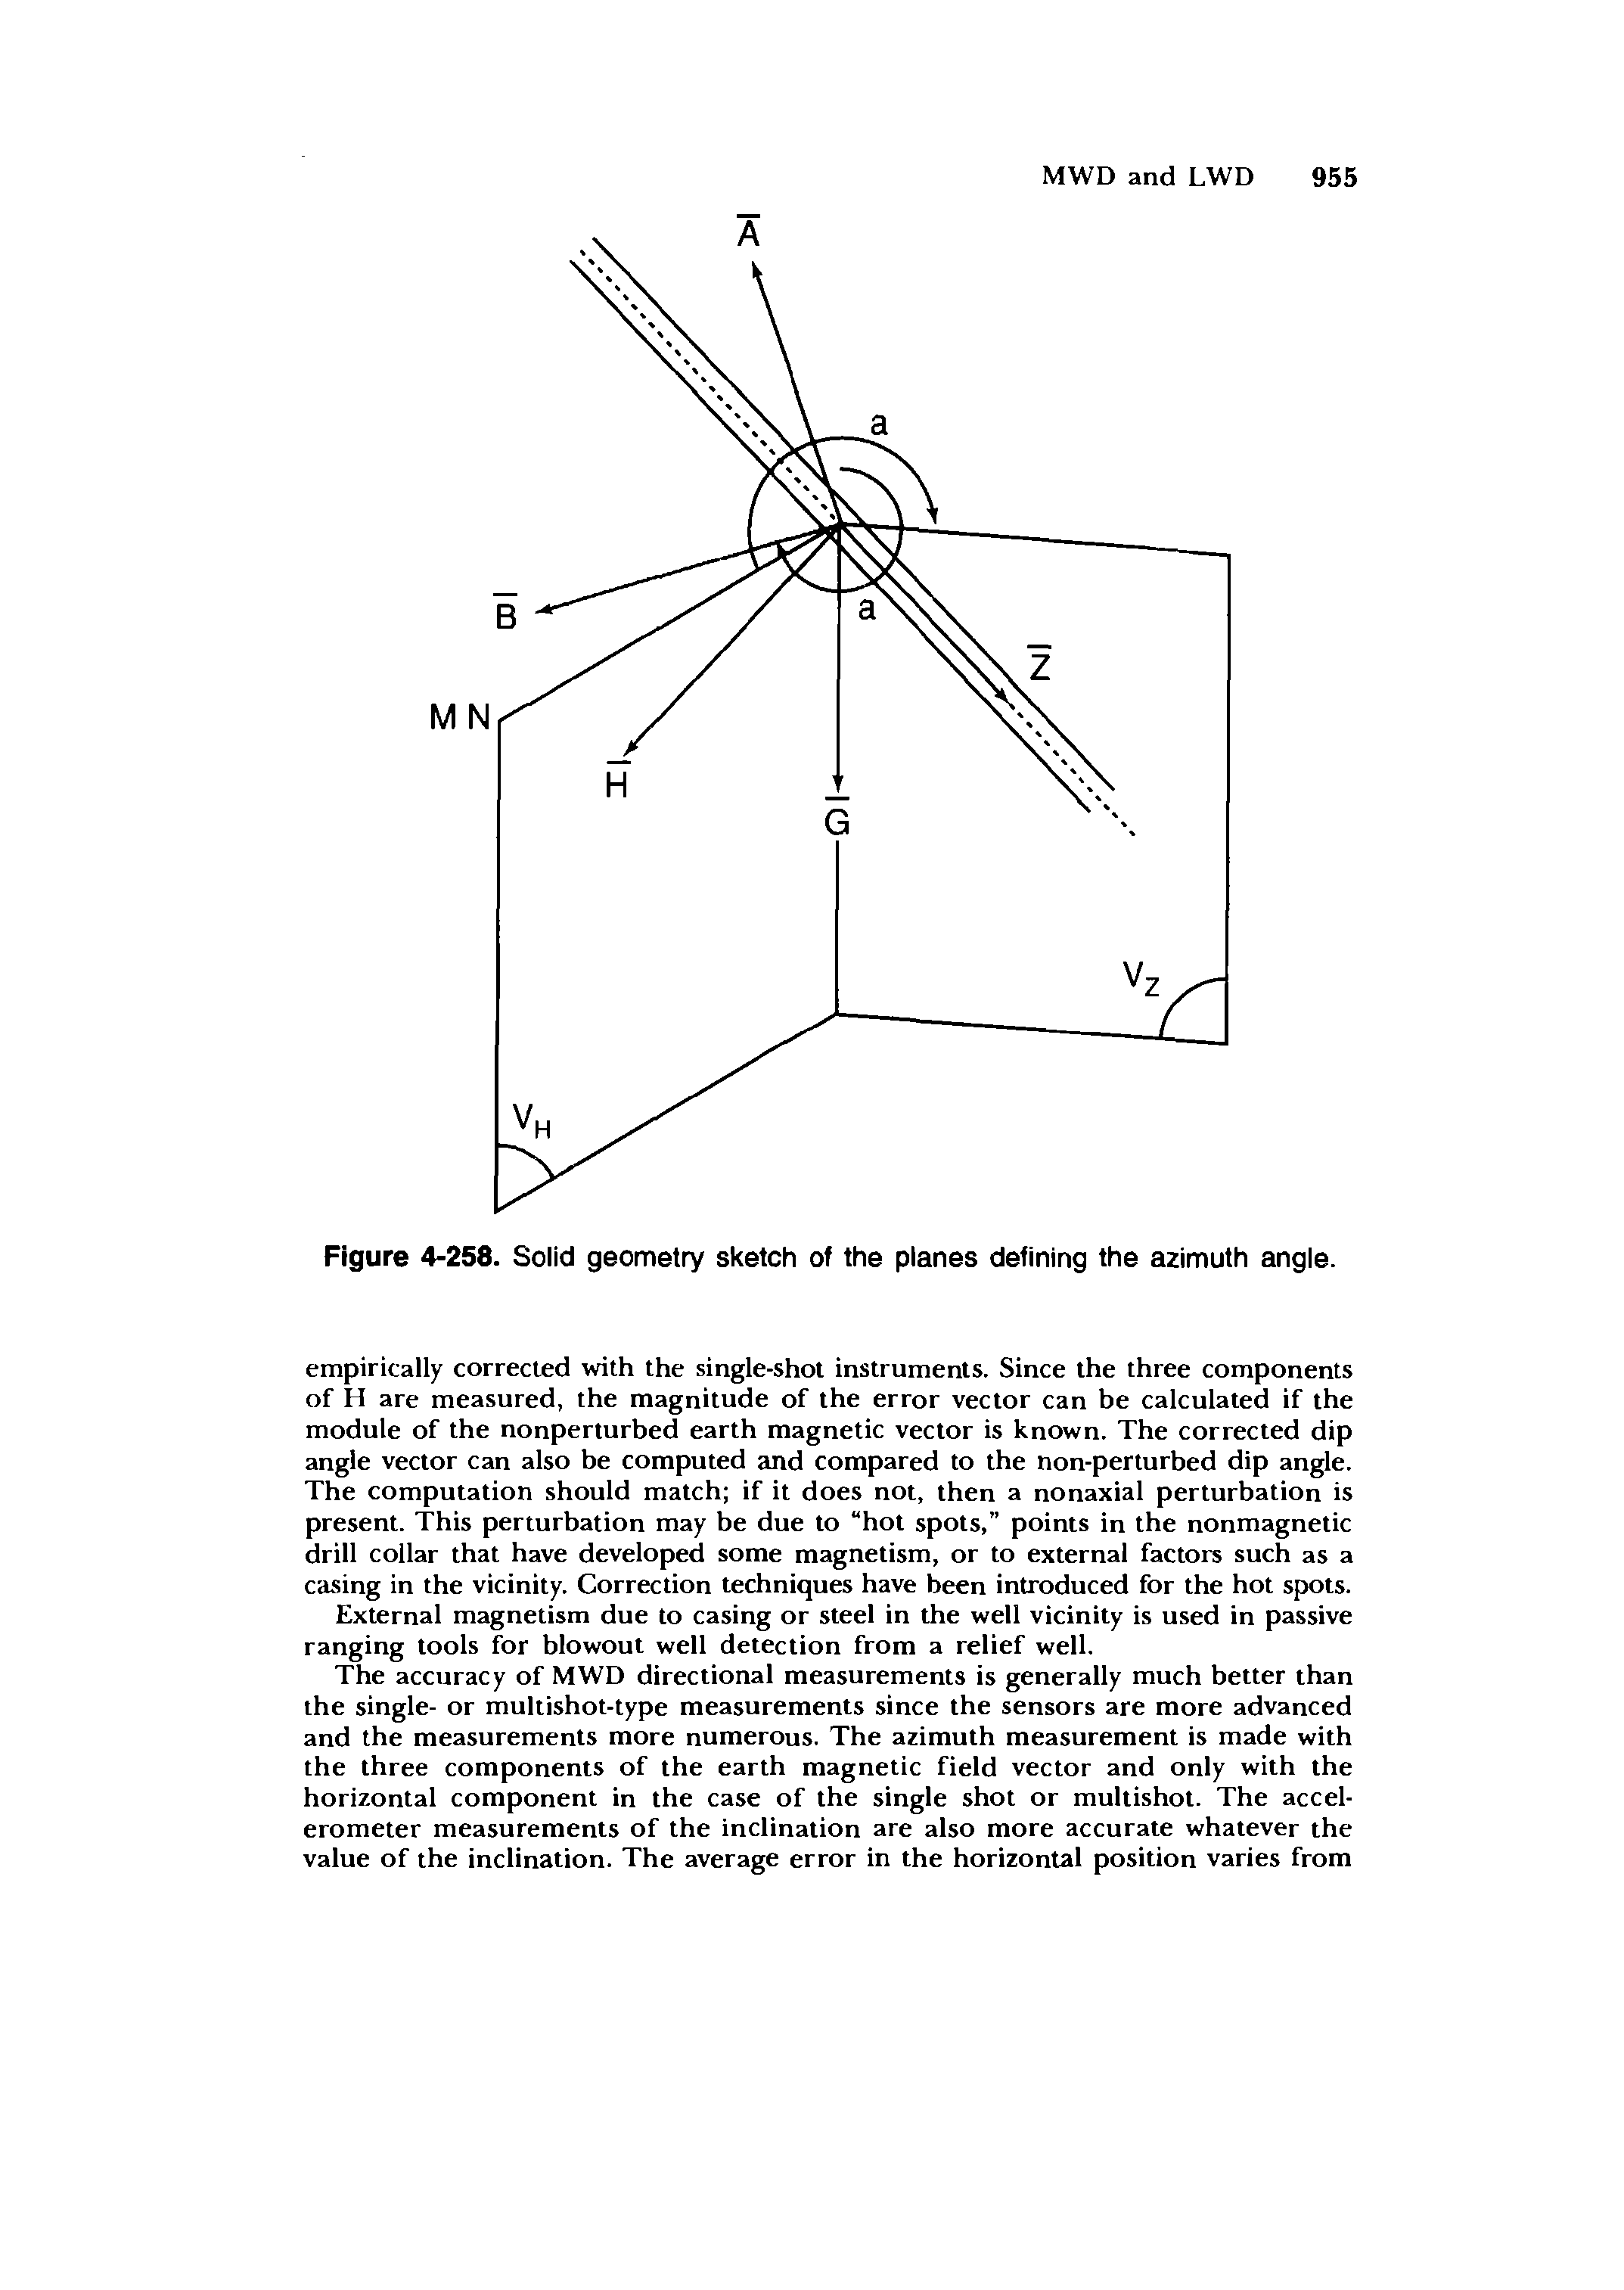 Figure 4-258. Solid geometry sketch of the planes defining the azimuth angie.